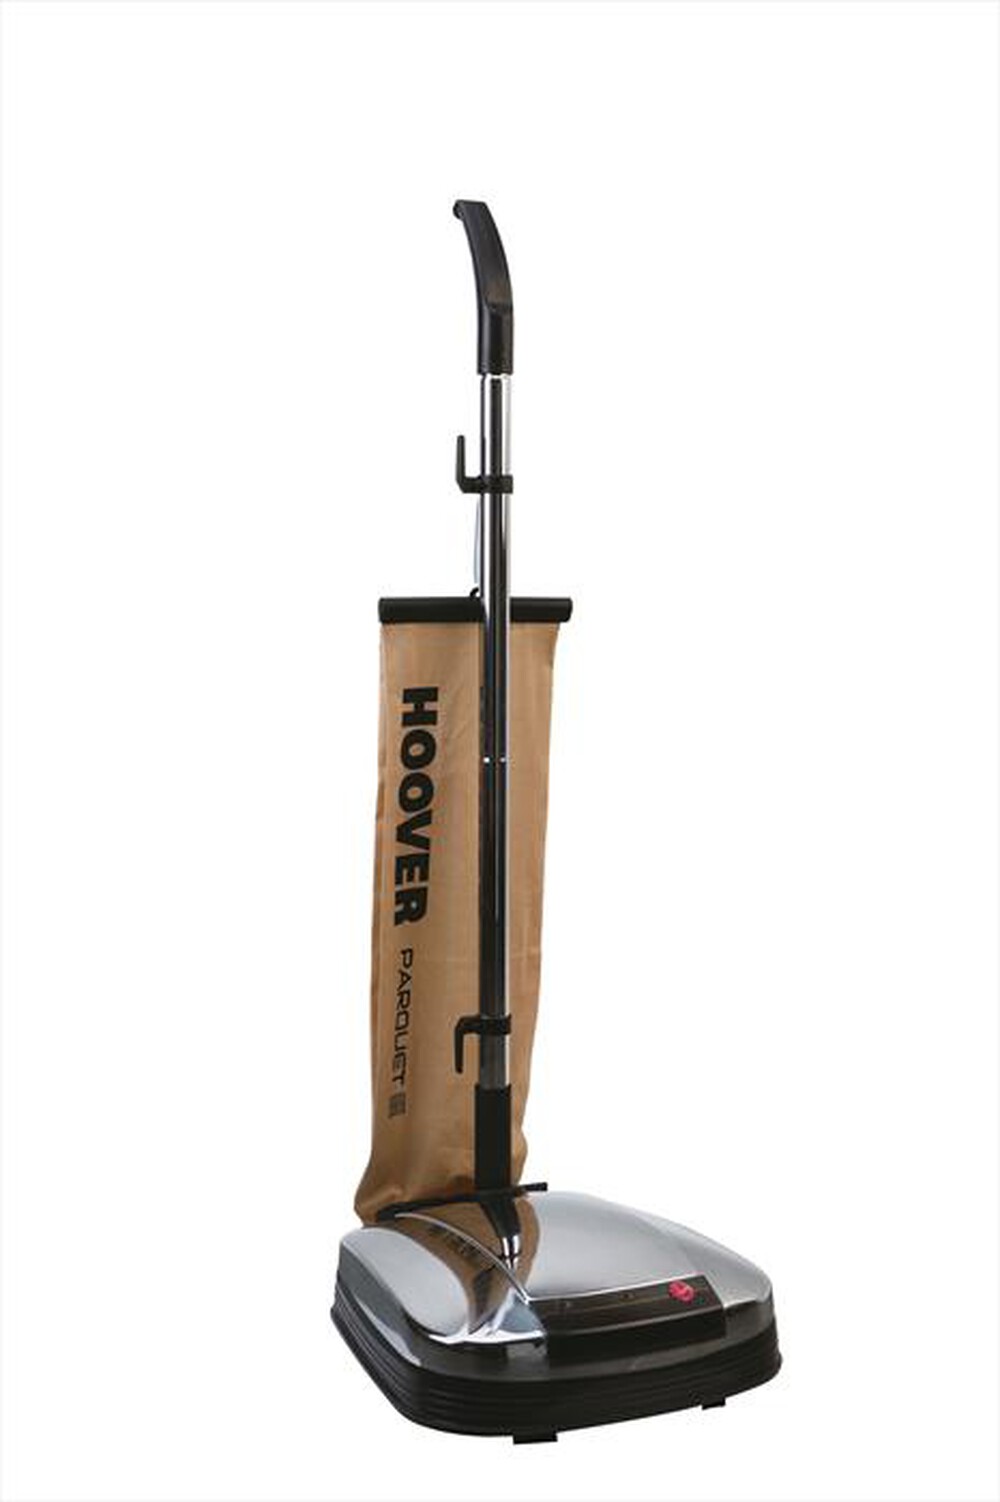 "HOOVER - F38PQ/1 011"